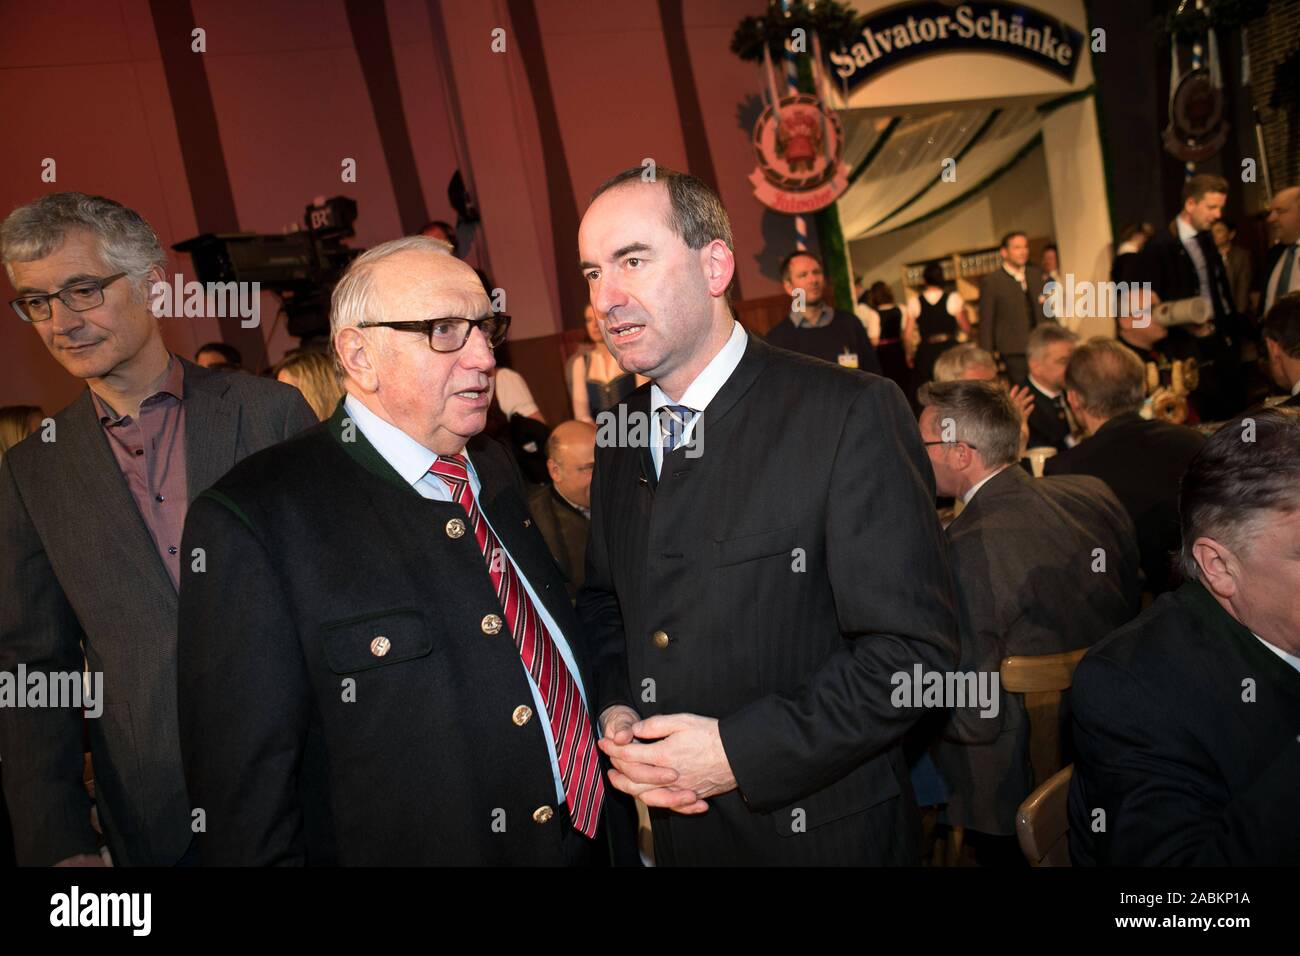 Economics Minister Hubert Aiwanger (r.) and host Toni Roiderer at the traditional strong beer tasting on Nockherberg in Munich. [automated translation] Stock Photo